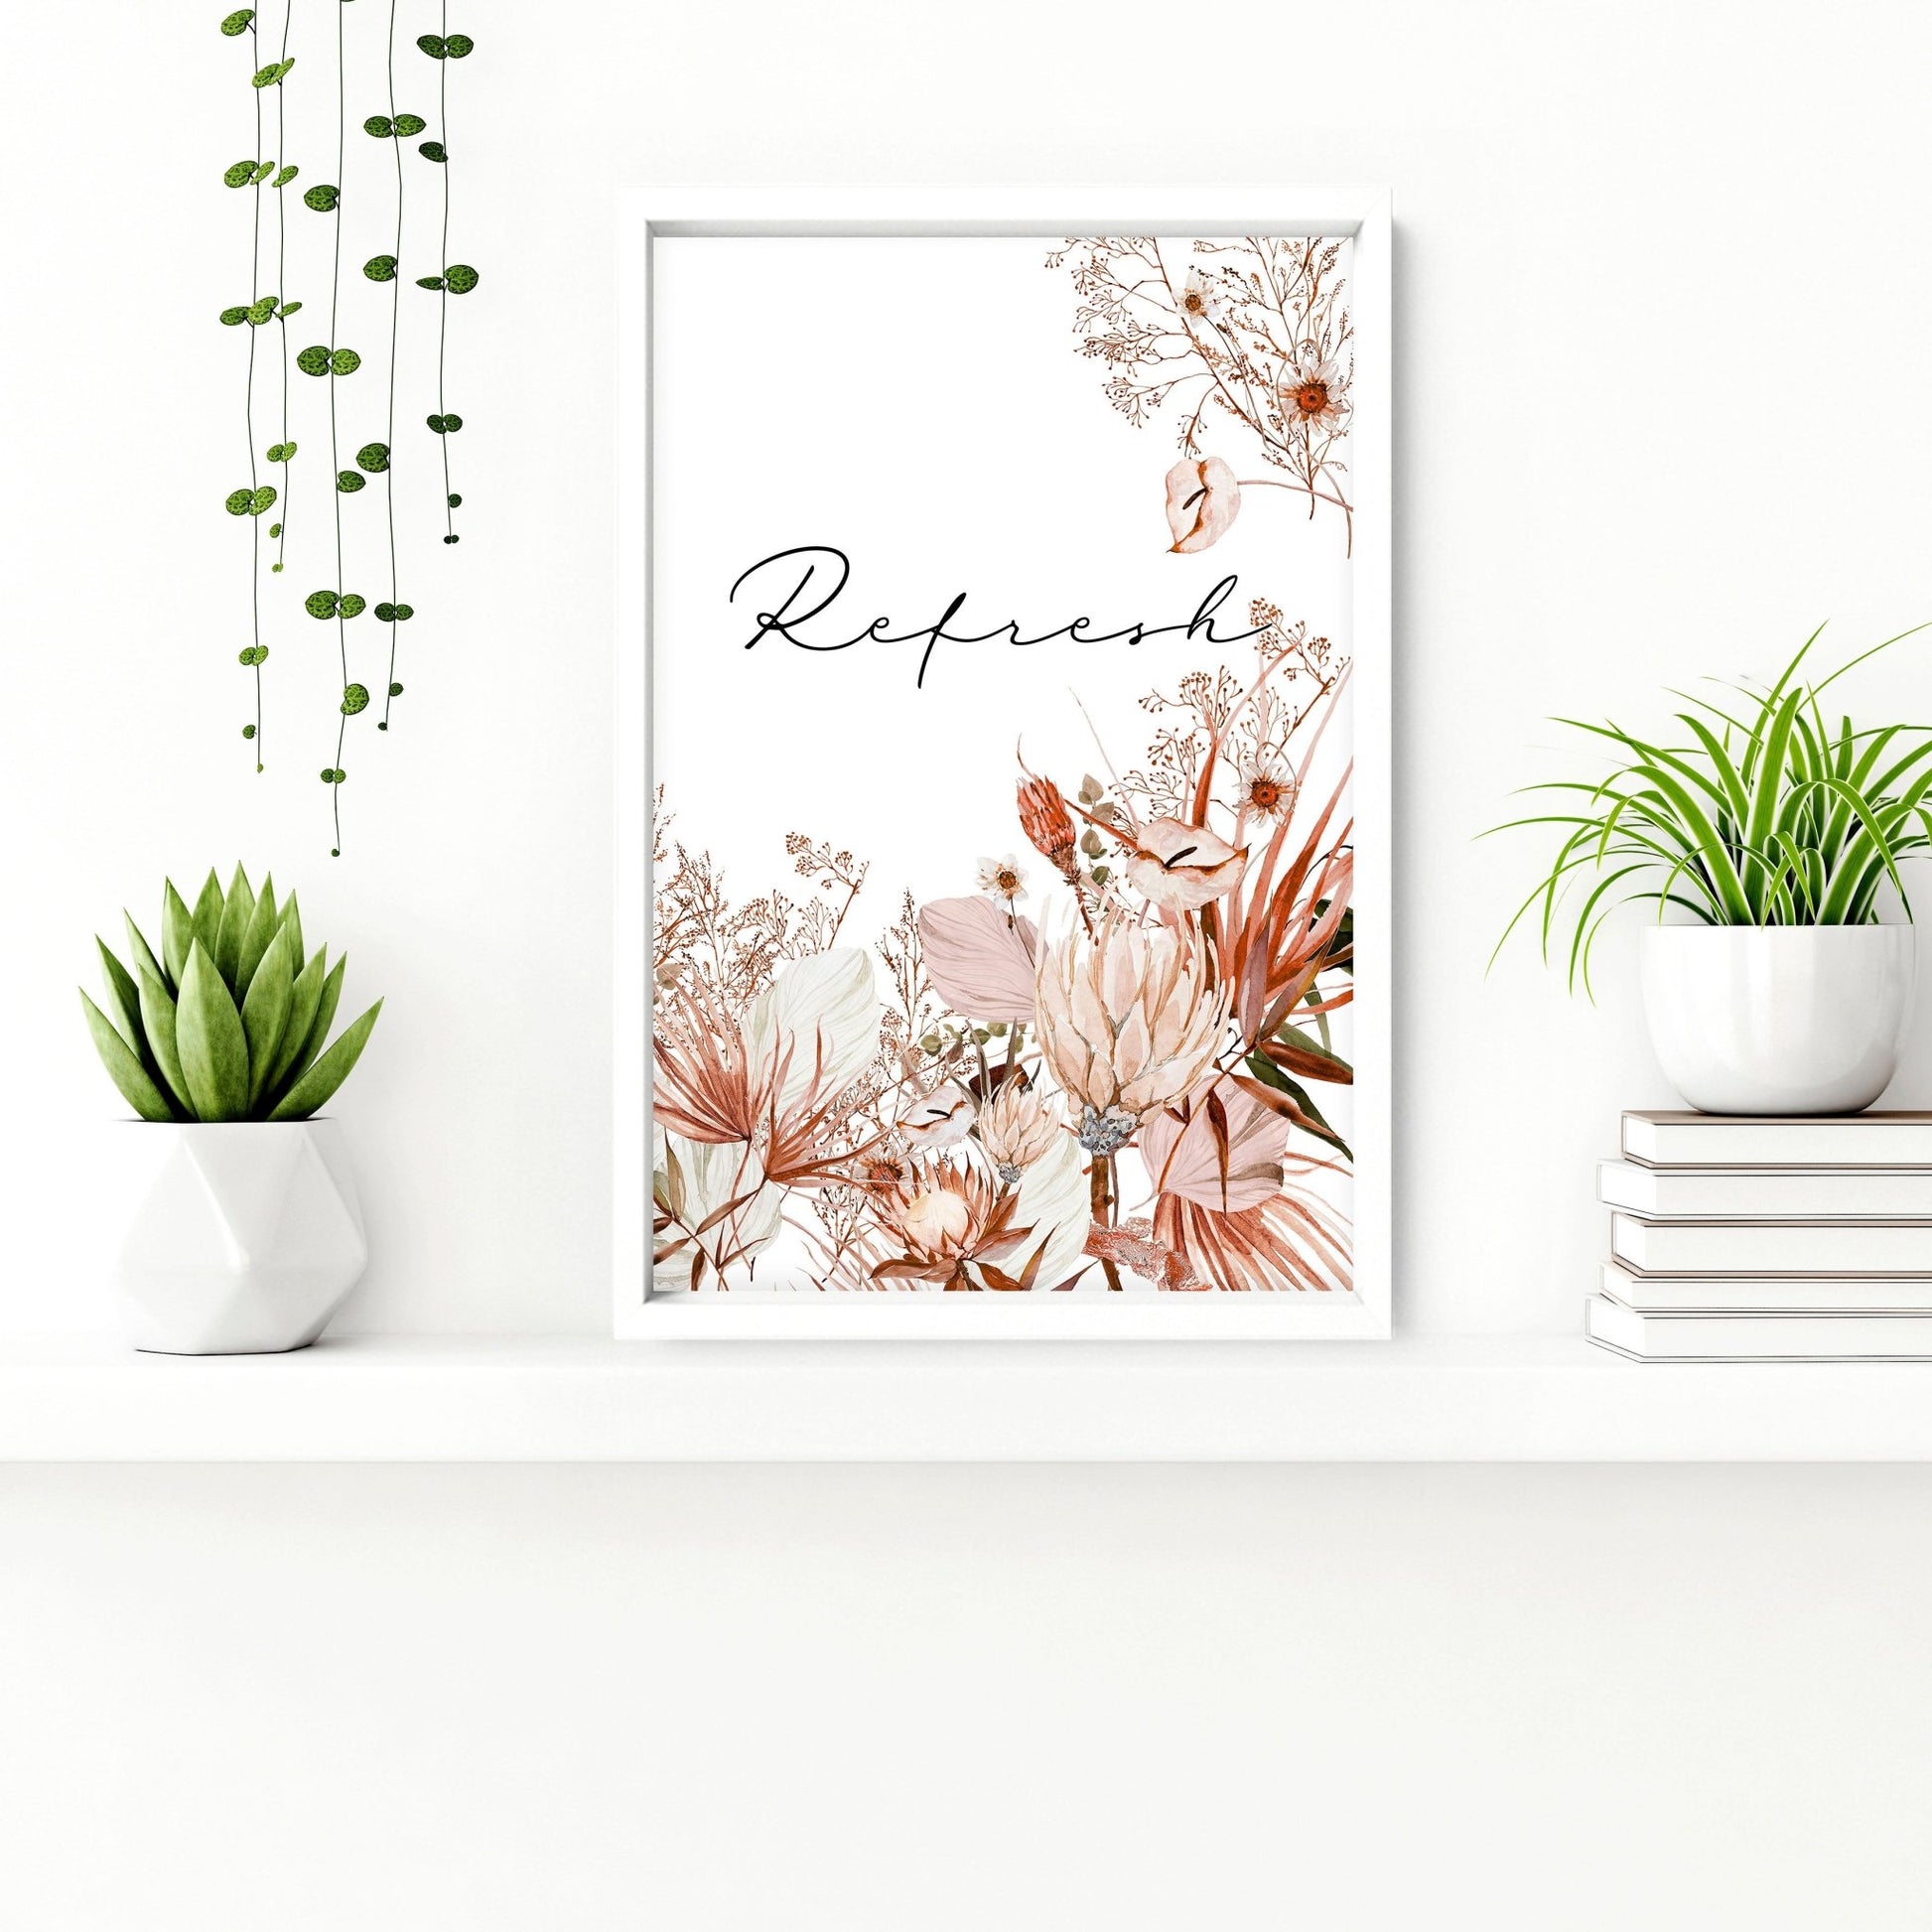 Wall prints for bathroom | Set of 2 art prints - About Wall Art